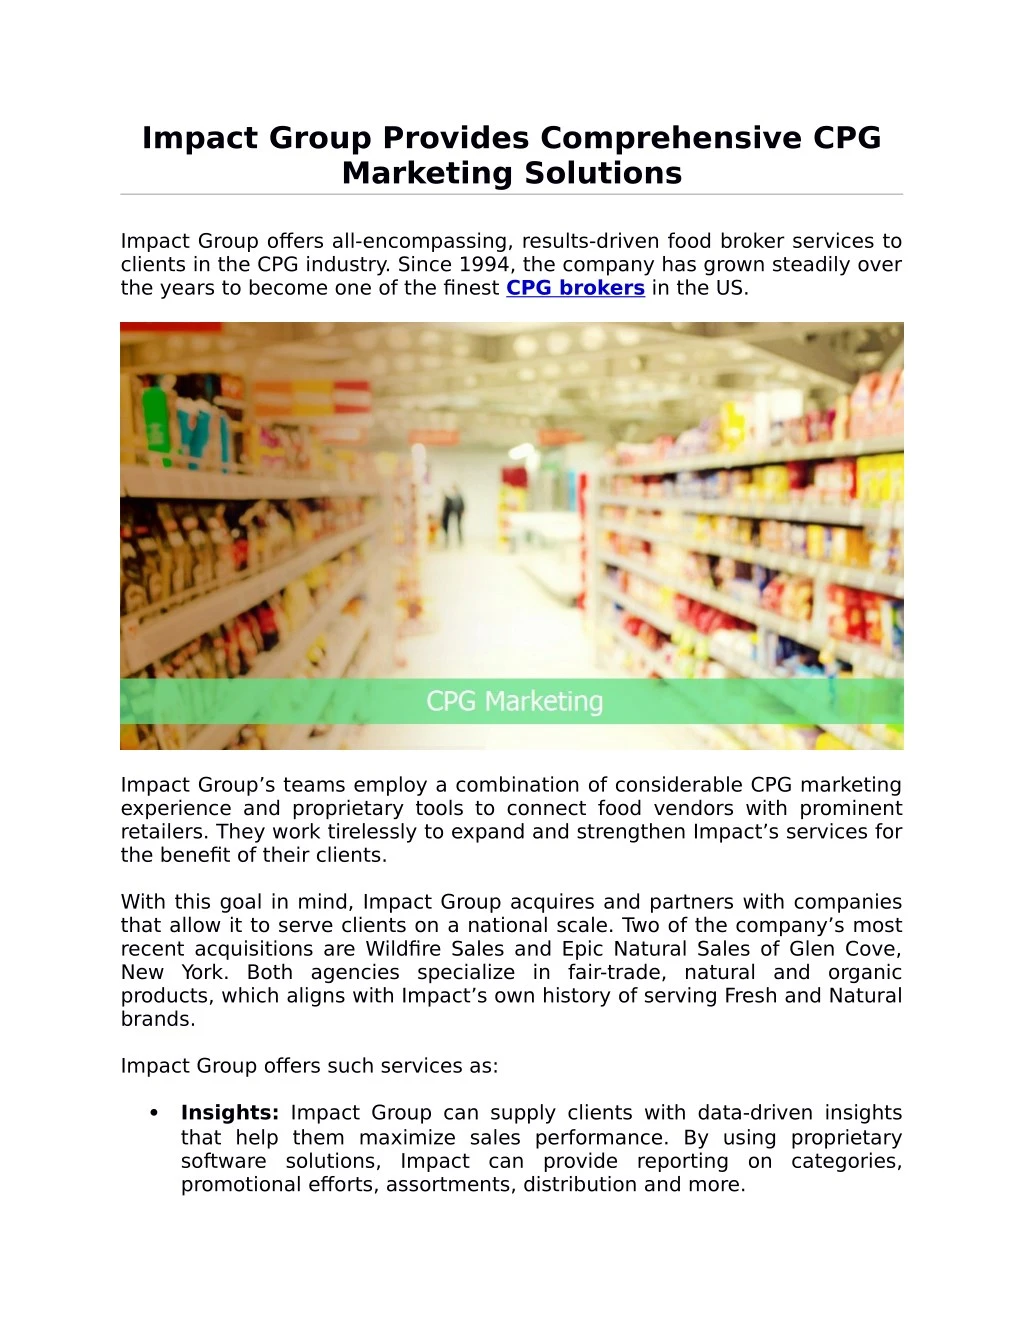 impact group provides comprehensive cpg marketing